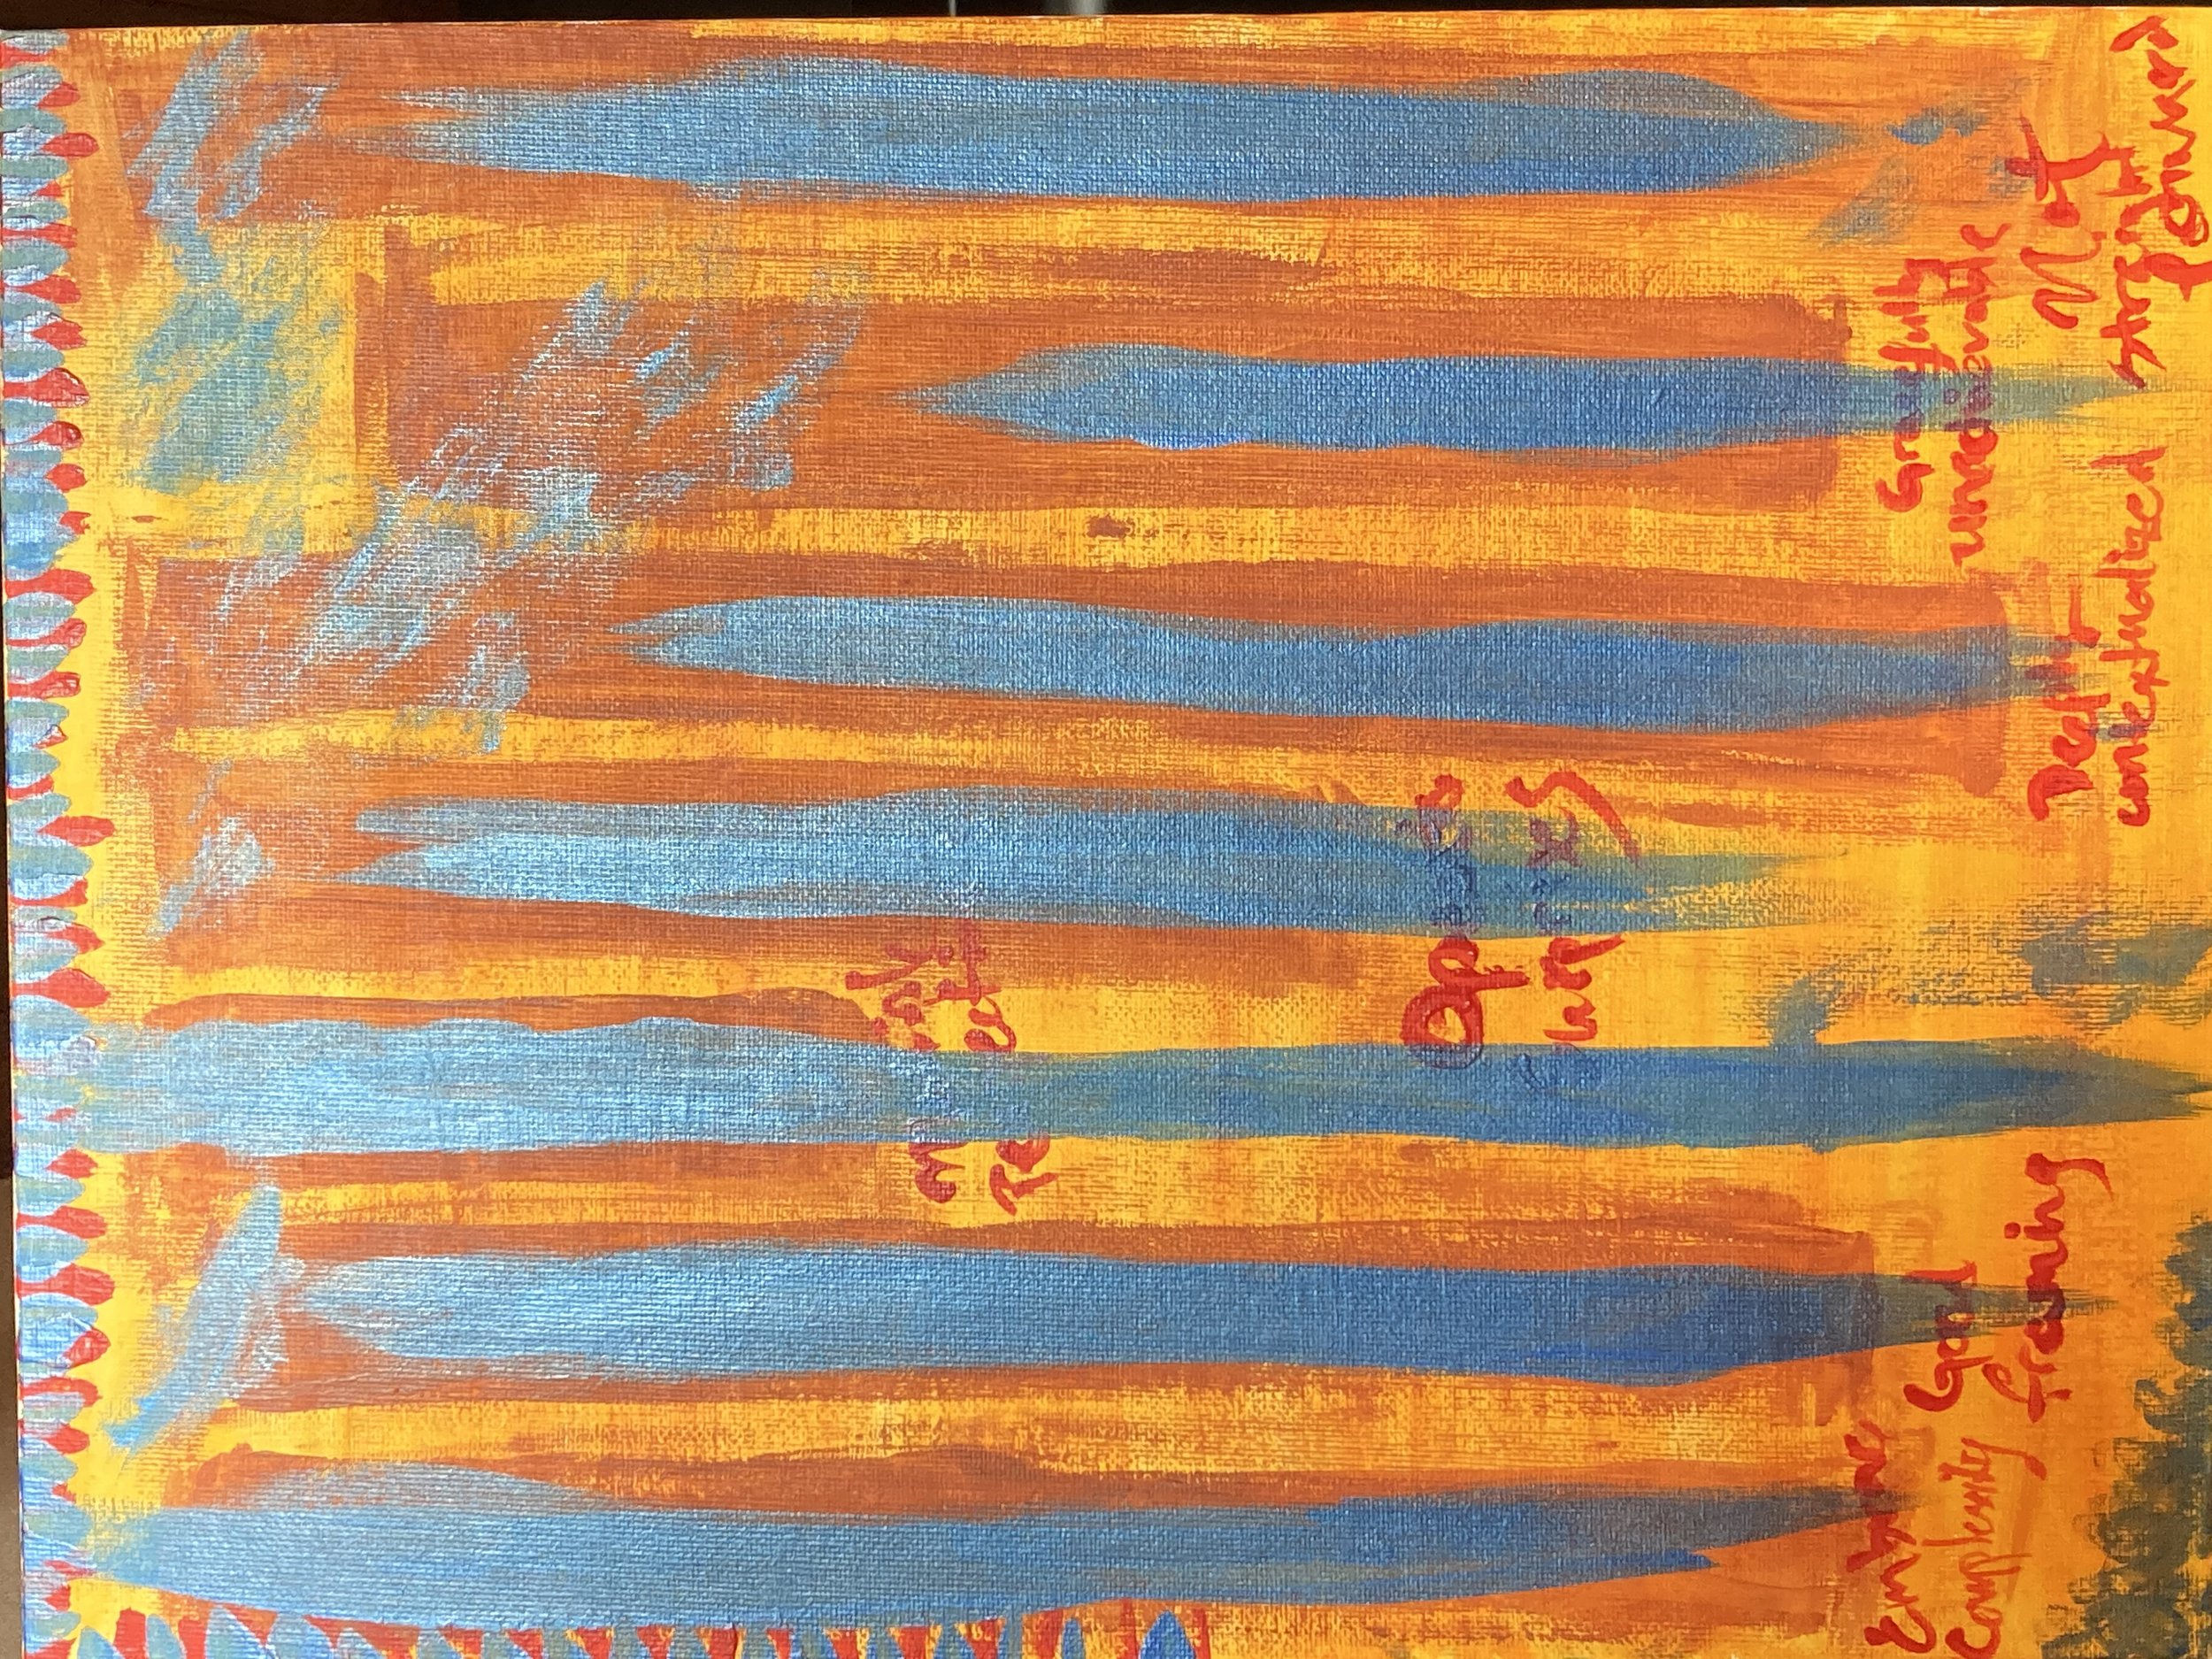  A painting of a series of horizontal blue stripes on a background of orange and yellow, each blue line labeled with types of experiences during a design process in red lettering. 